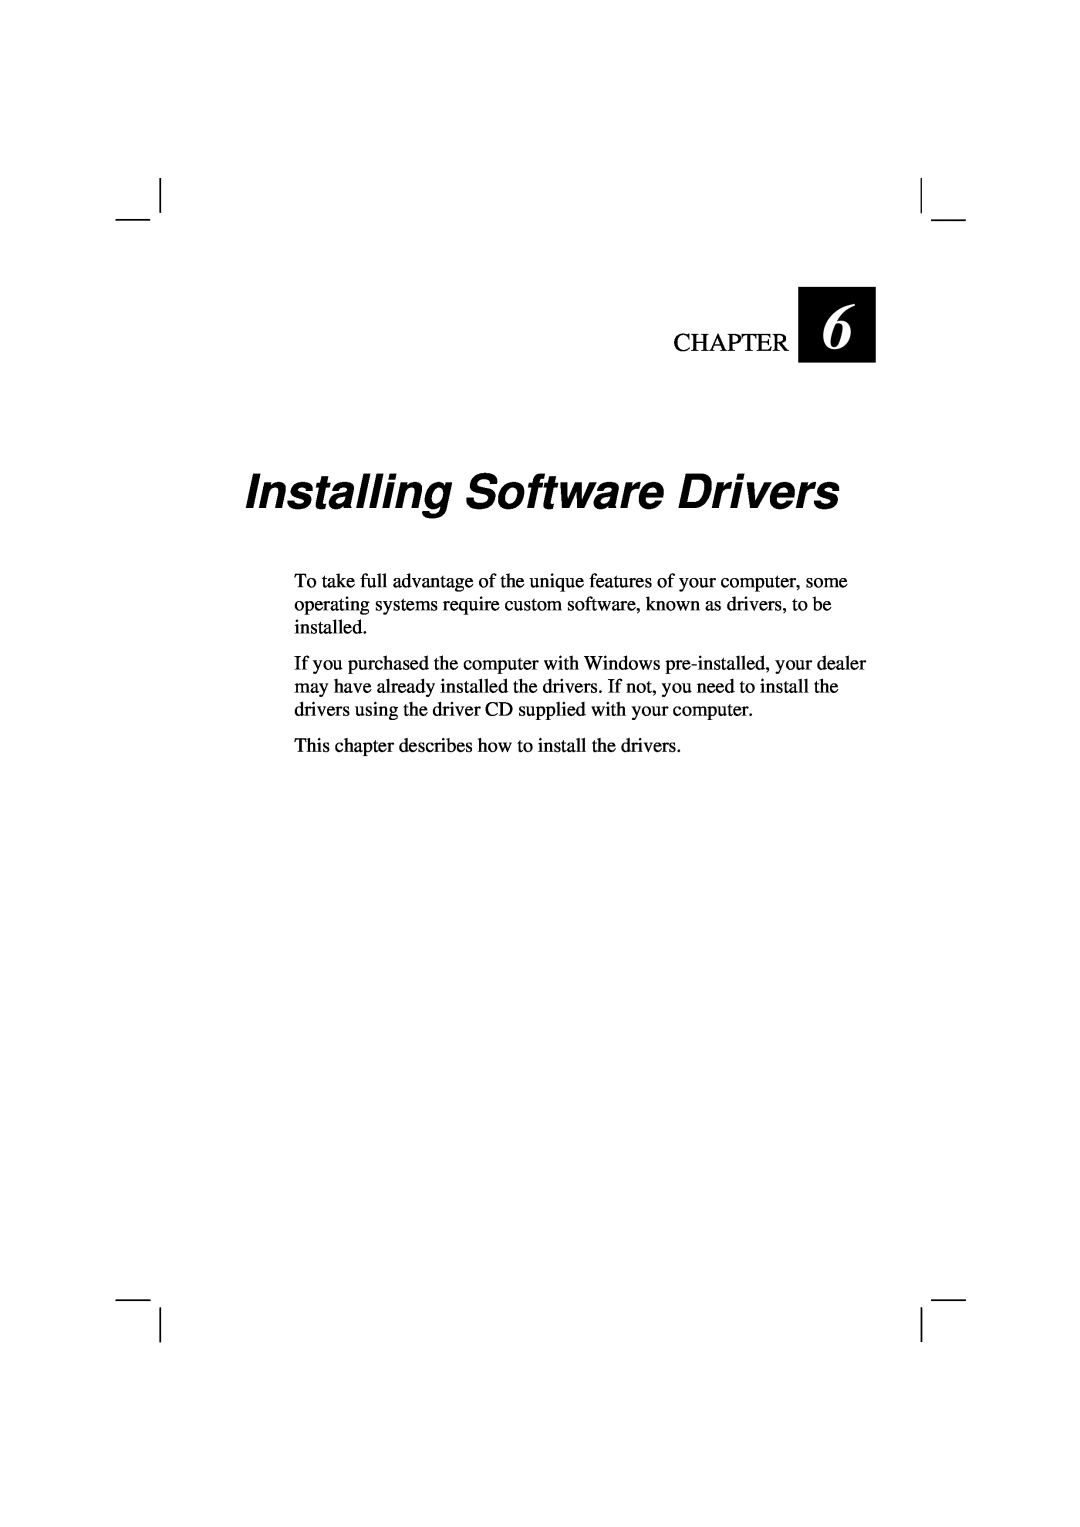 Casio HK1223 owner manual Installing Software Drivers, Chapter 